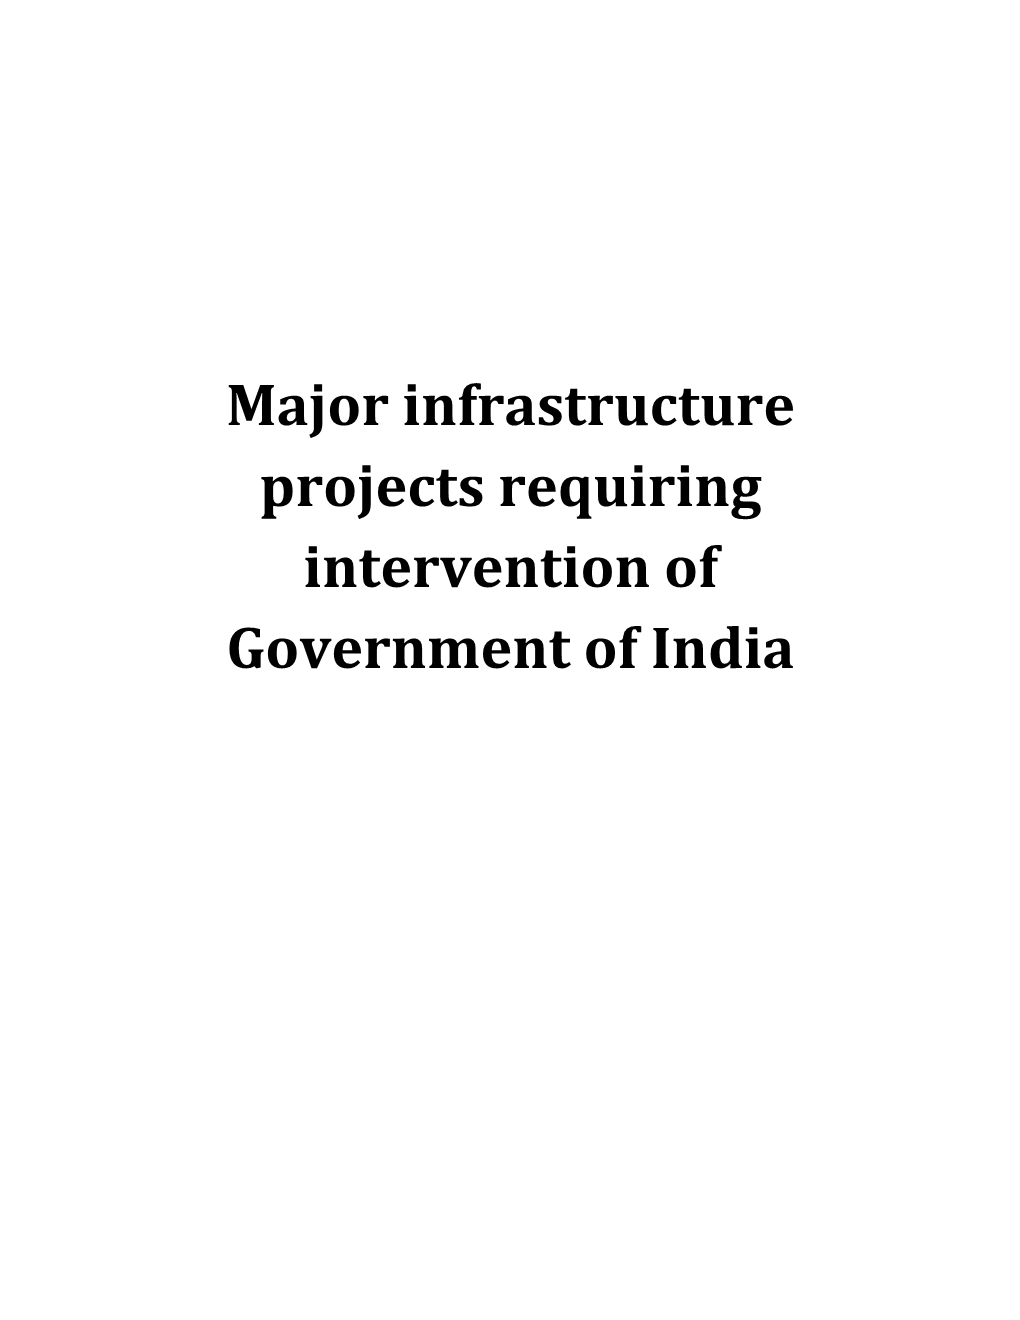 Major Infrastructure Projects Requires Intervention Of